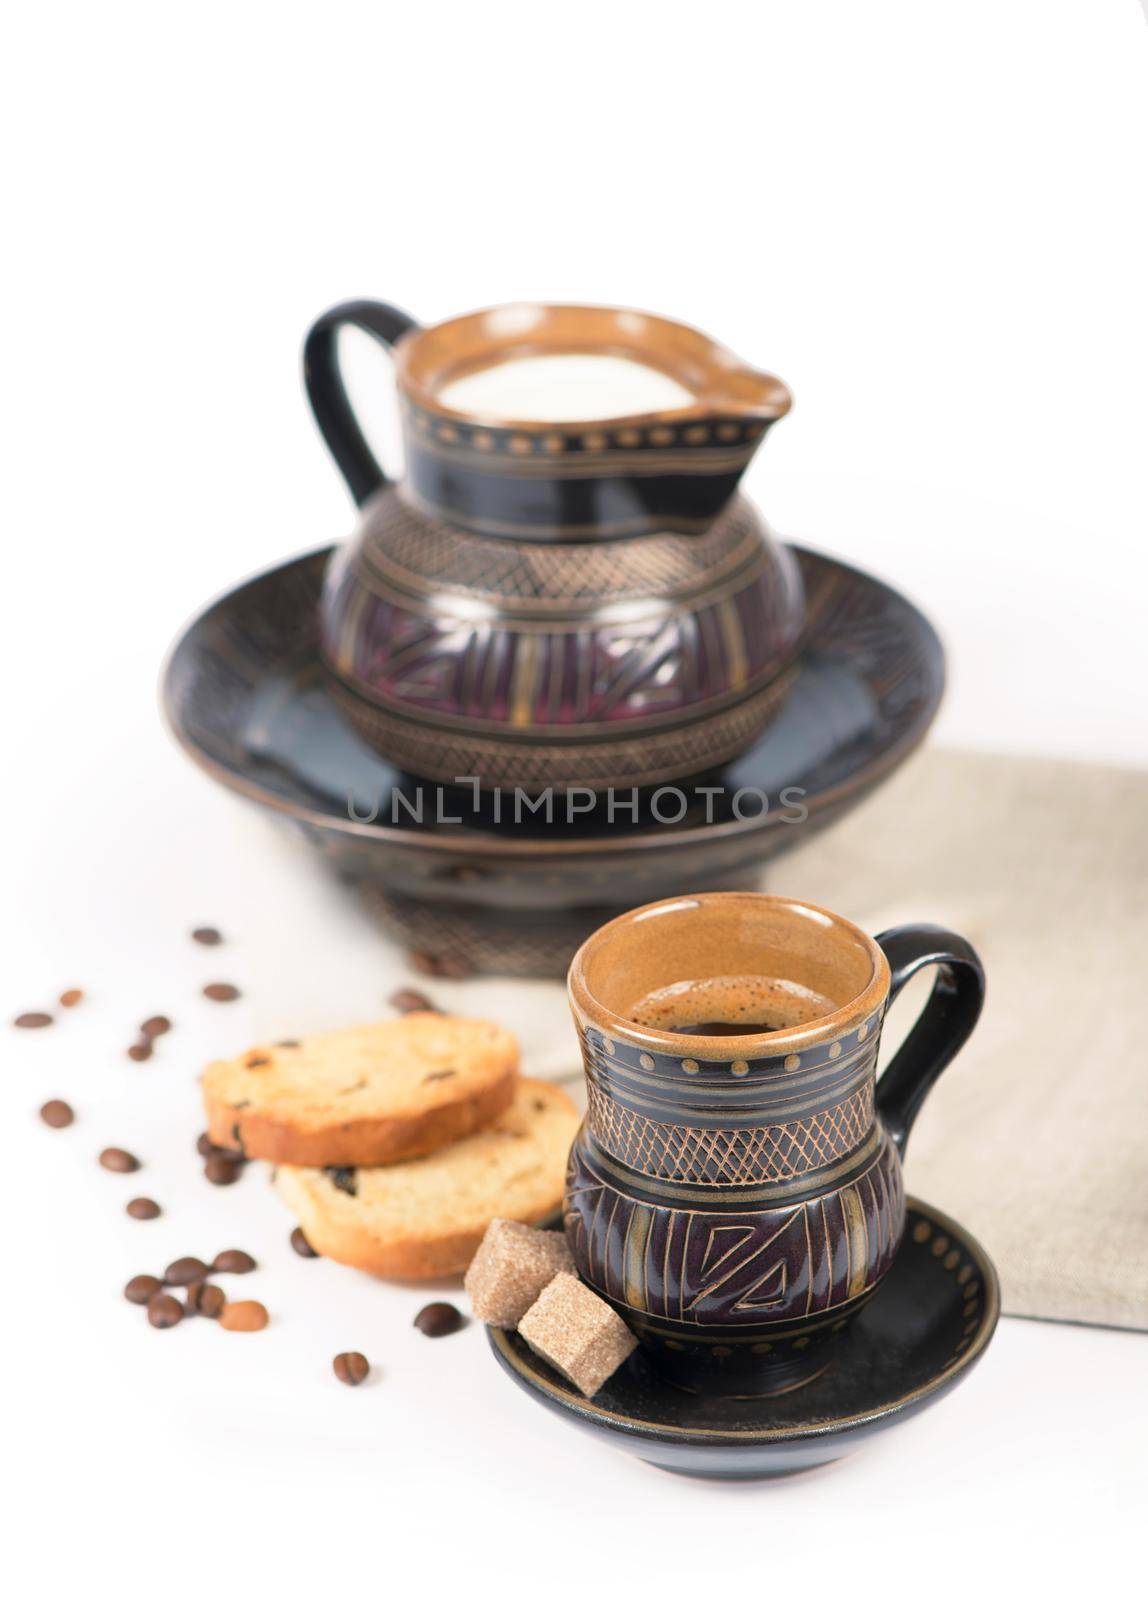 old black pottery, coffee beans, candy and a cup of drink by aprilphoto